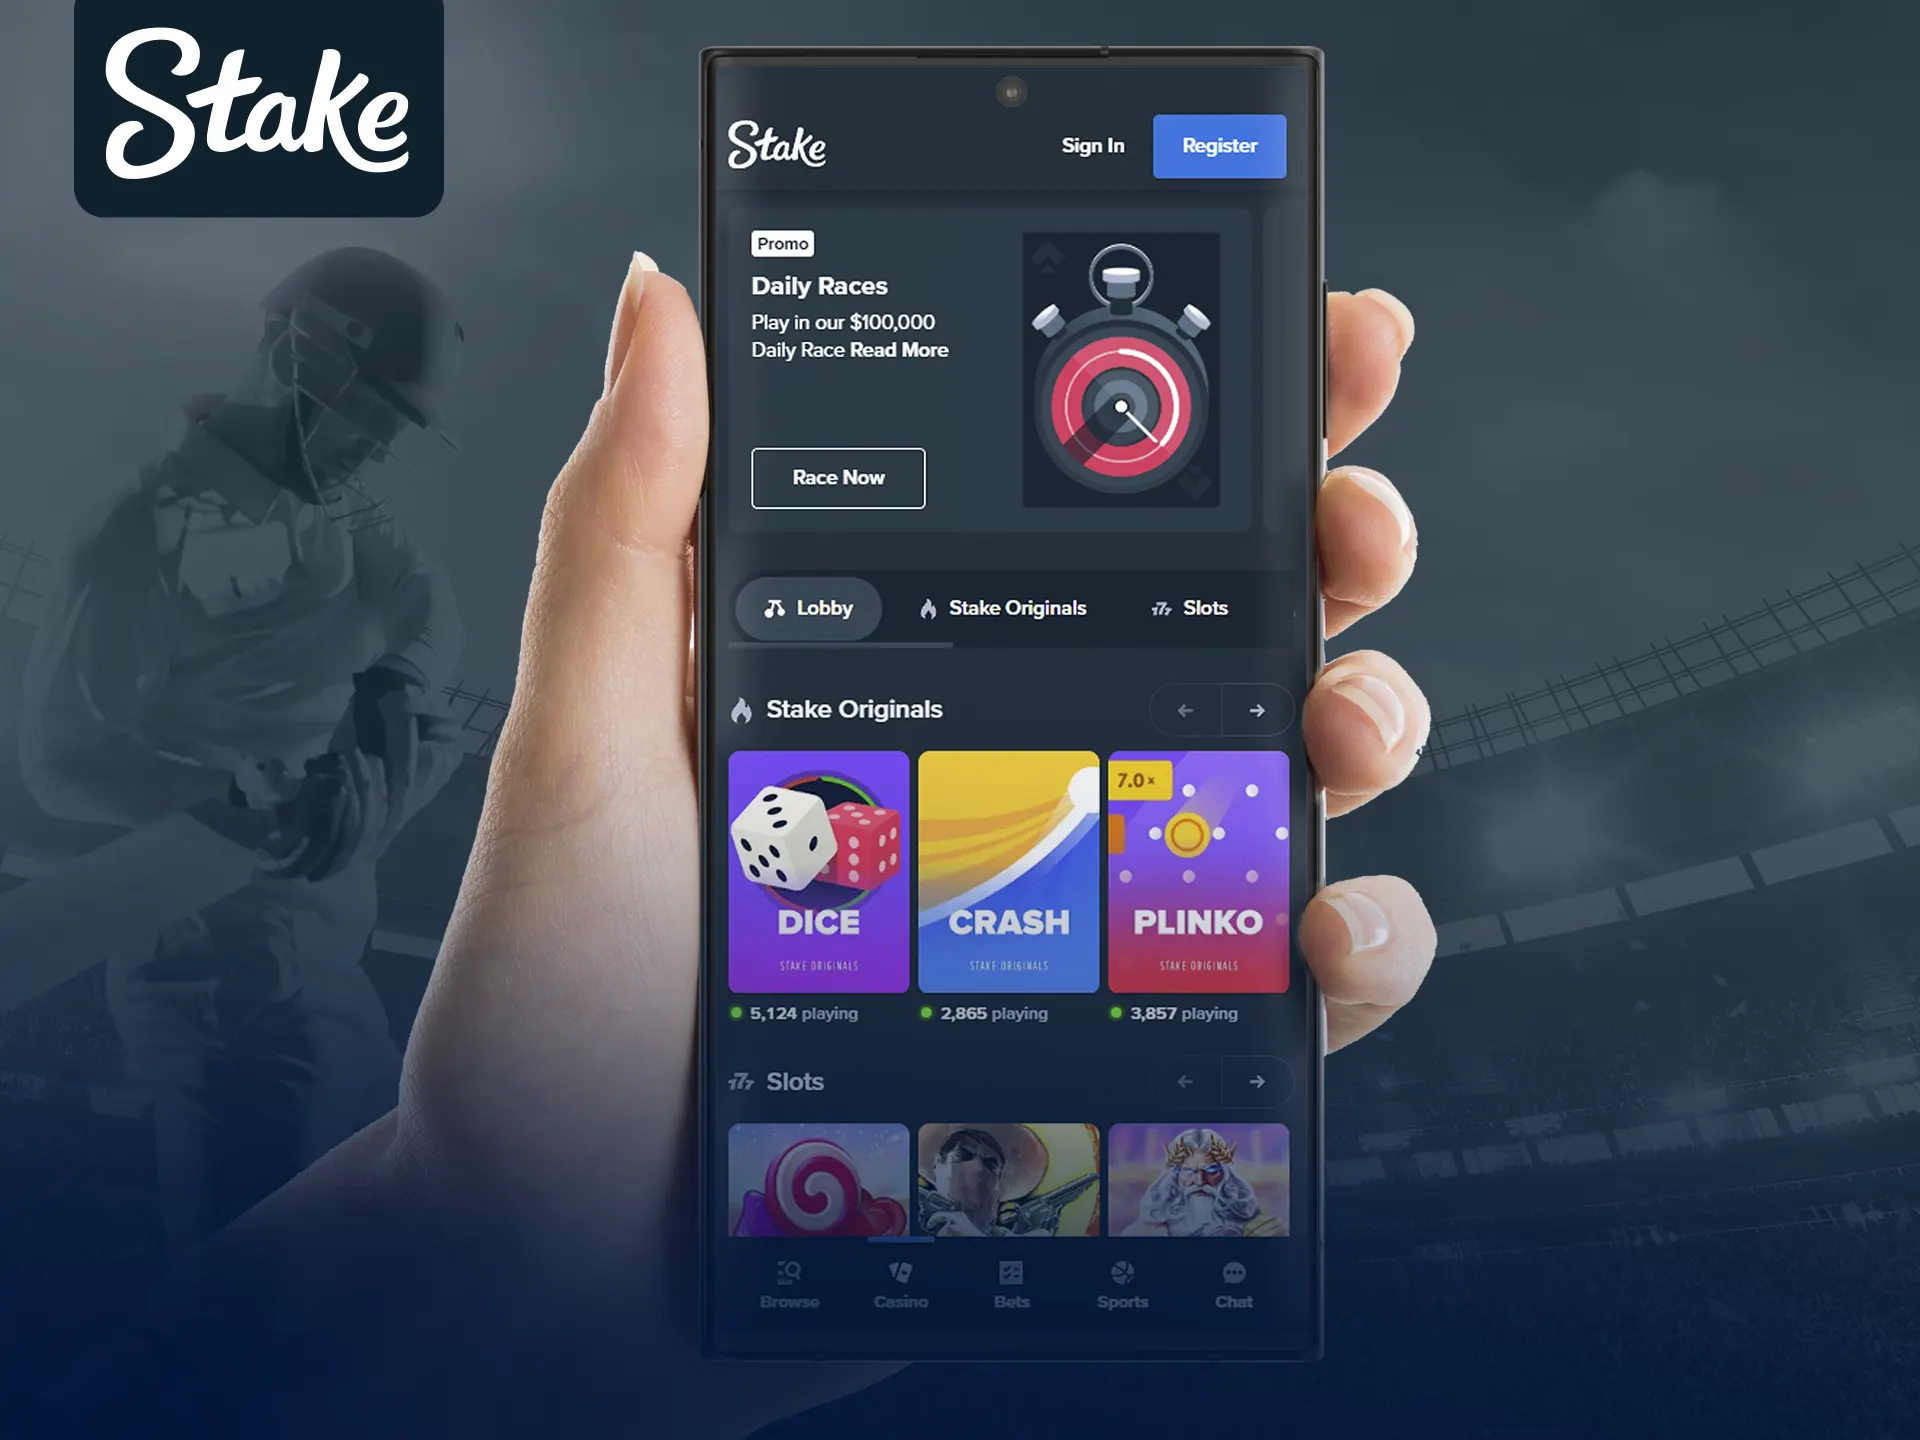 Stake's mobile site offers full features on smartphones.